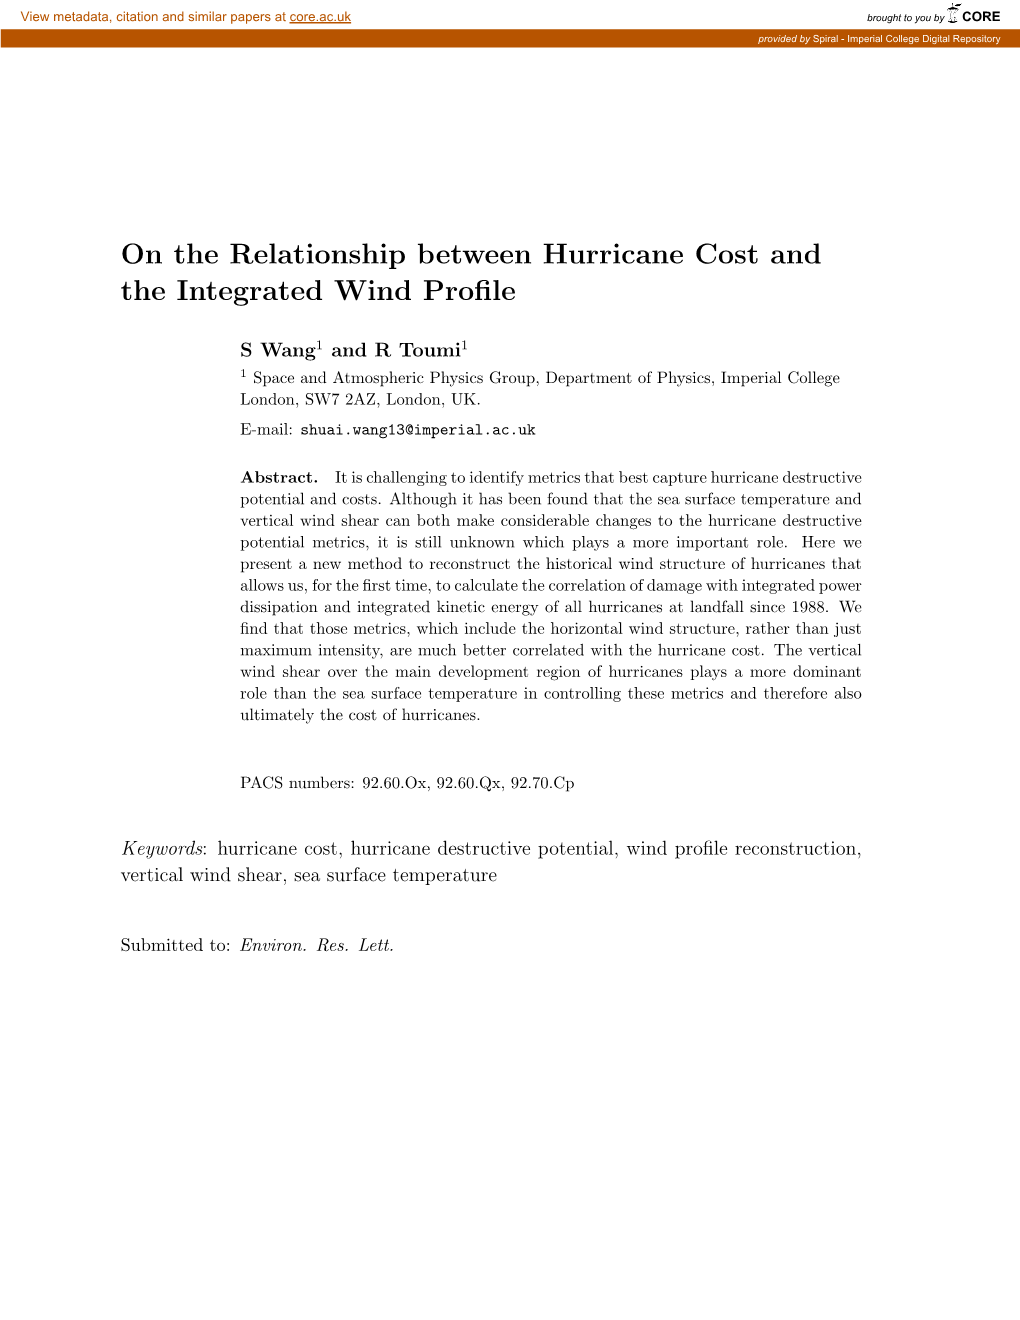 On the Relationship Between Hurricane Cost and the Integrated Wind Proﬁle